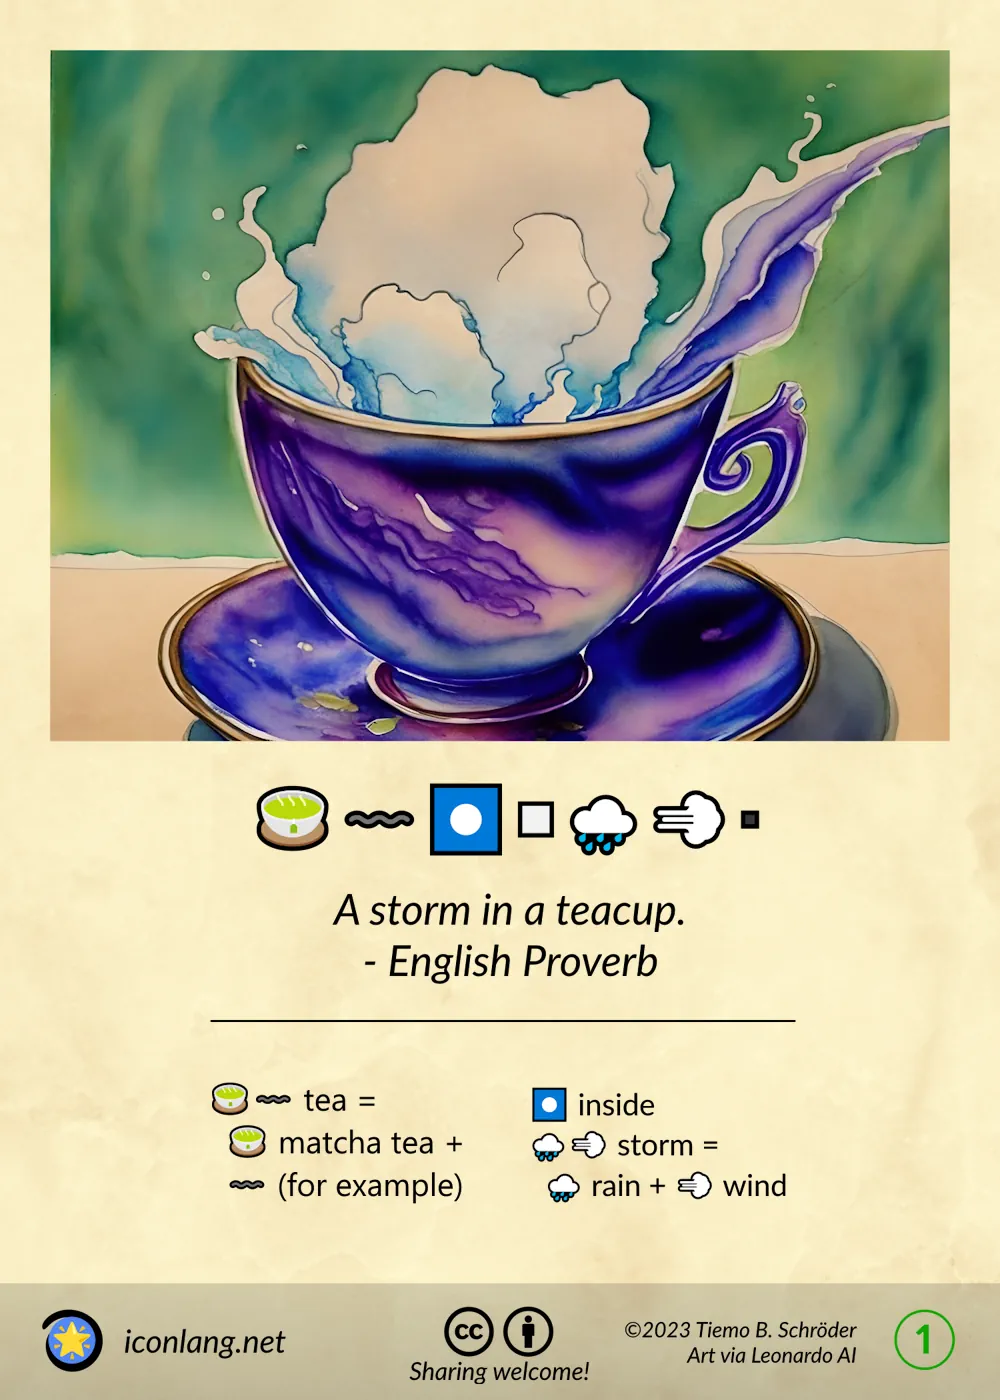 Card: A storm in a teacup. - English Proverb